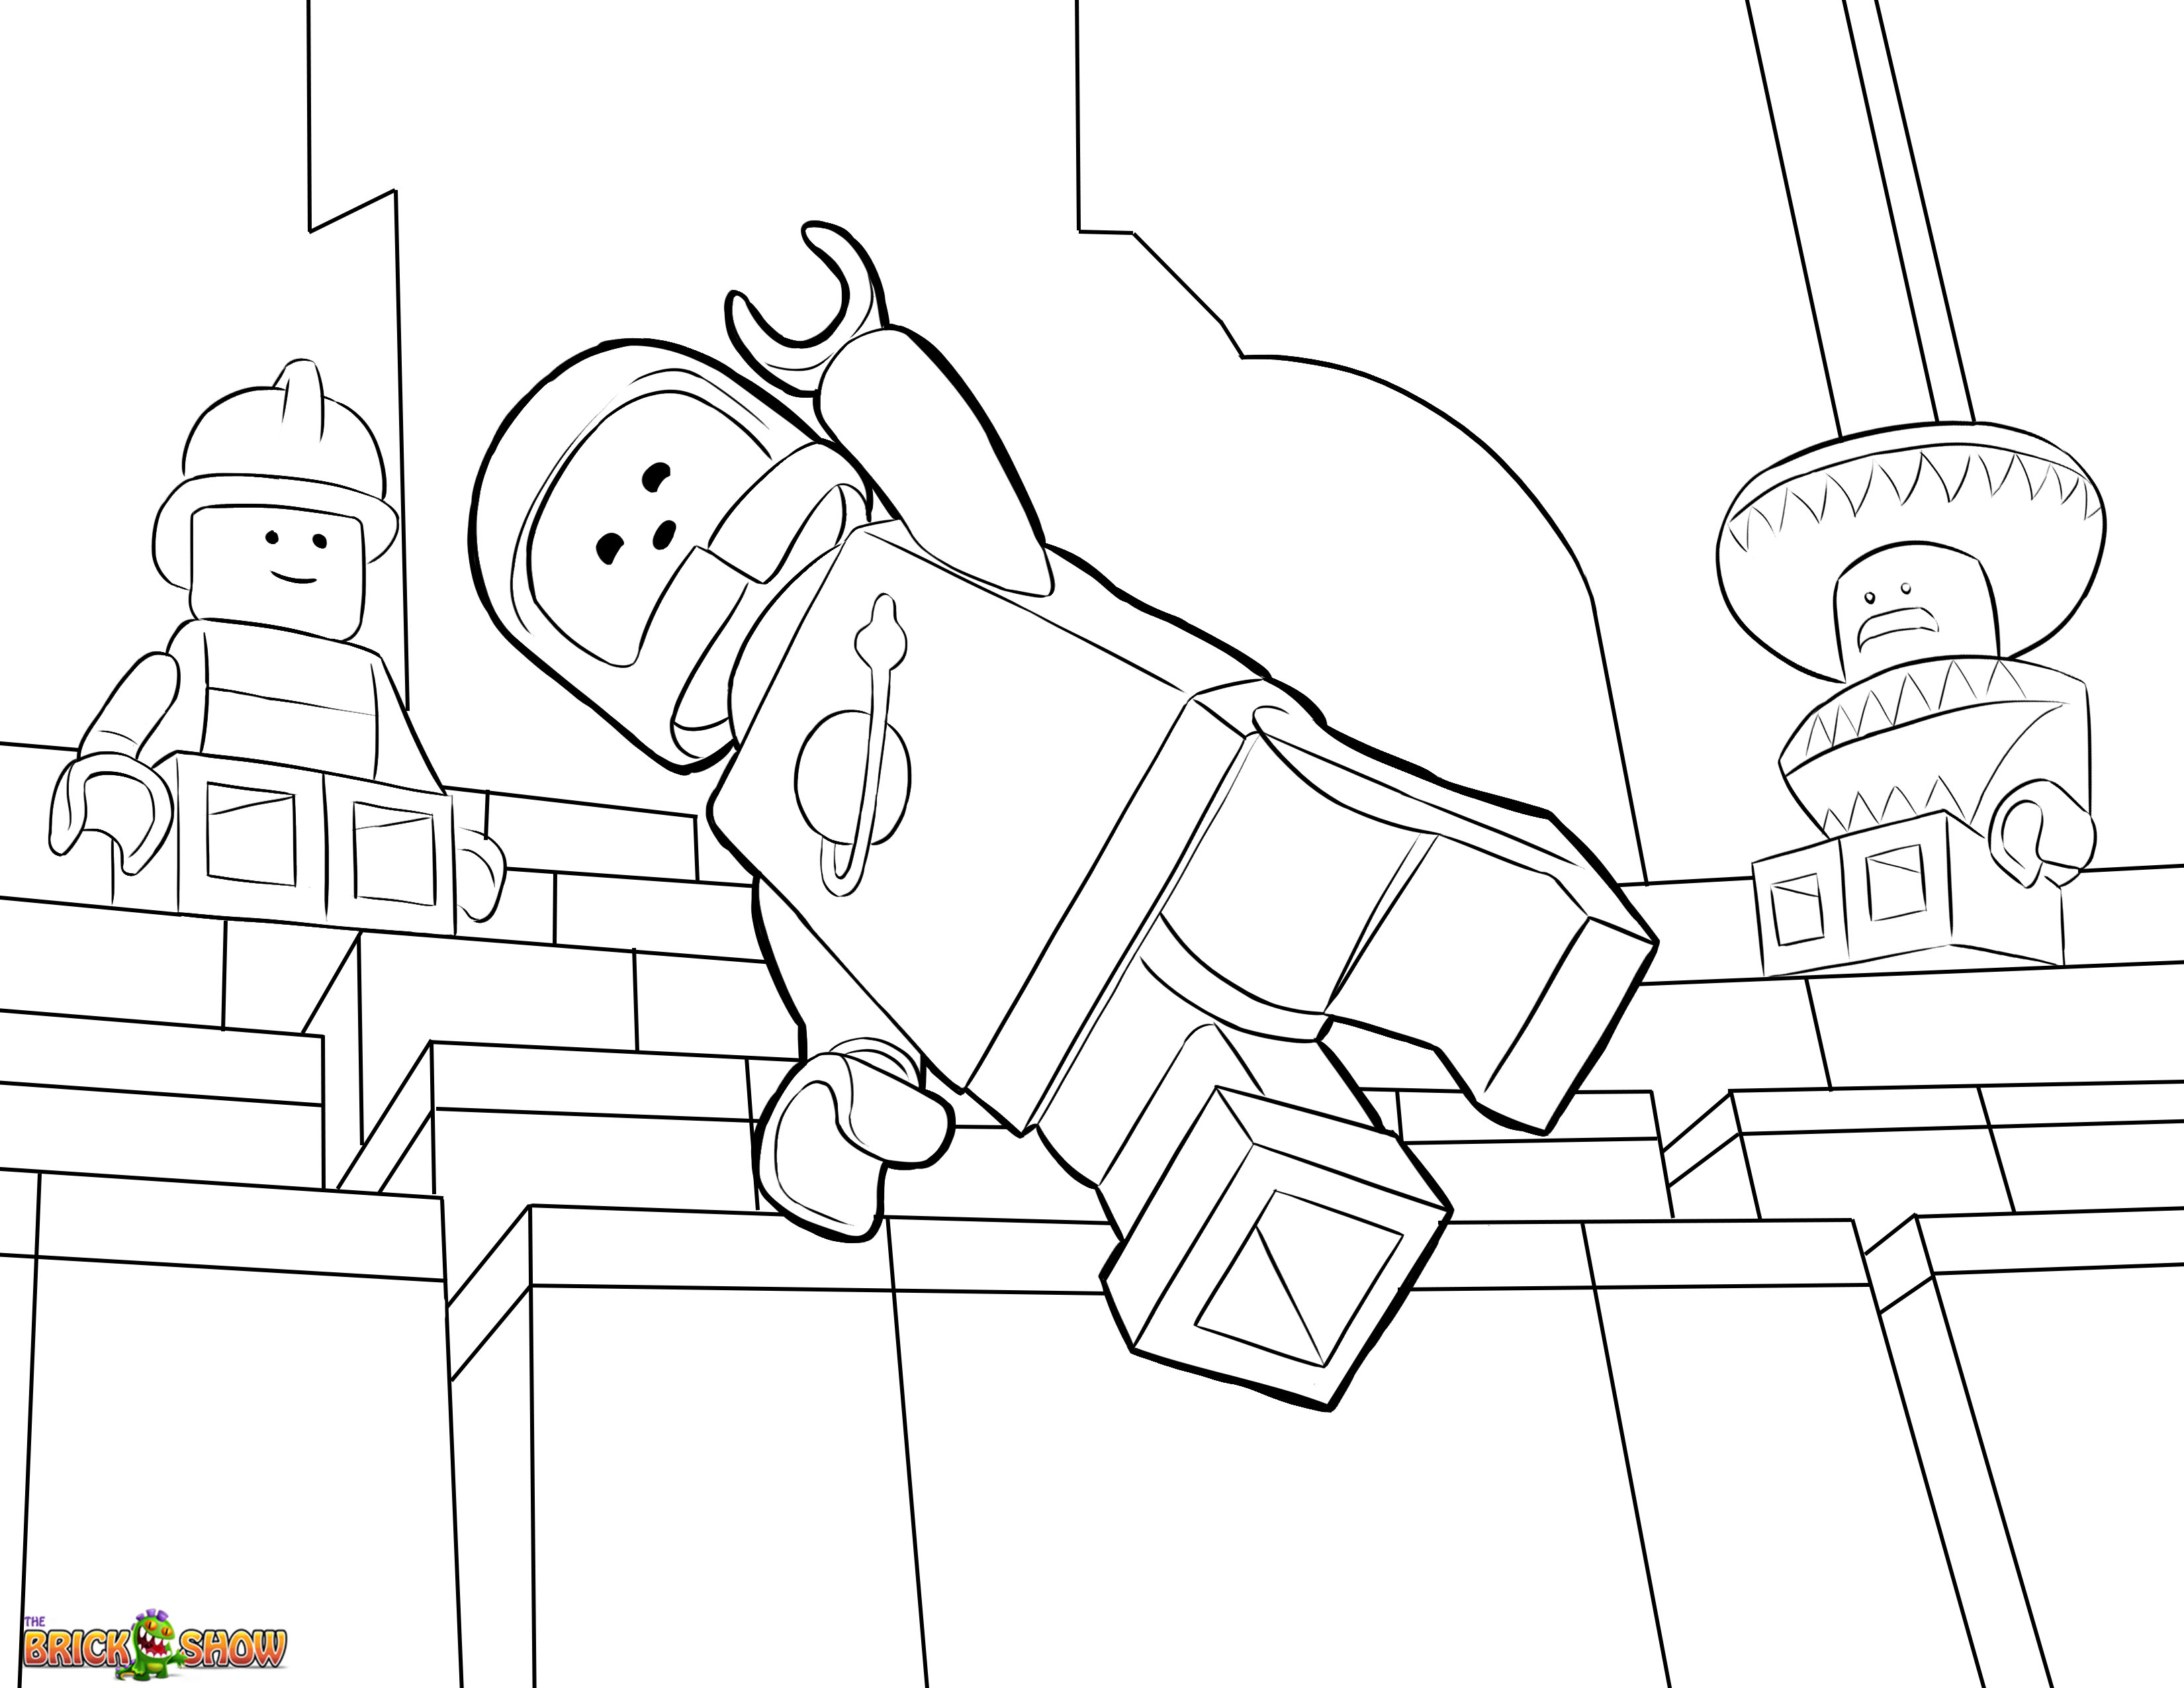 Superman Christmas Coloring Pages The Lego Movie Coloring Pages Free Printable The Lego Lego